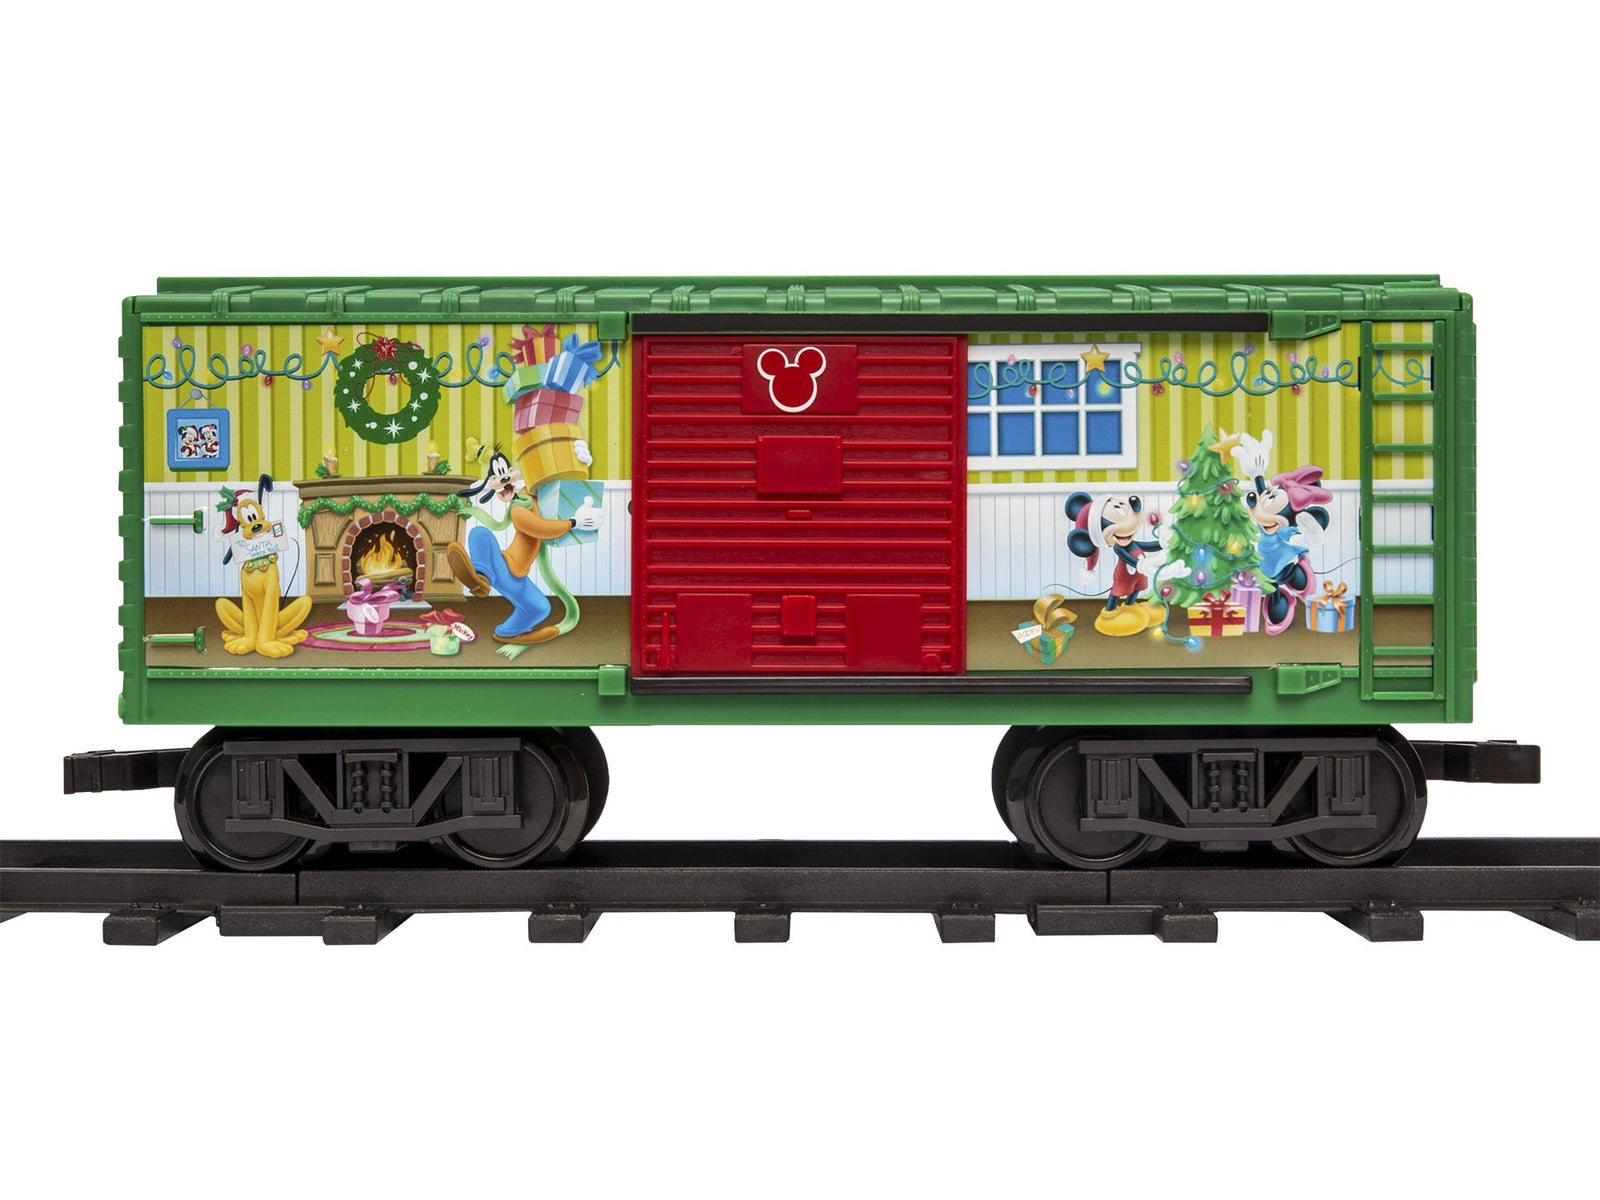 Lionel Disney Mickey Mouse Express Ready-to-Play Set, Battery-powered Model Train with Remote